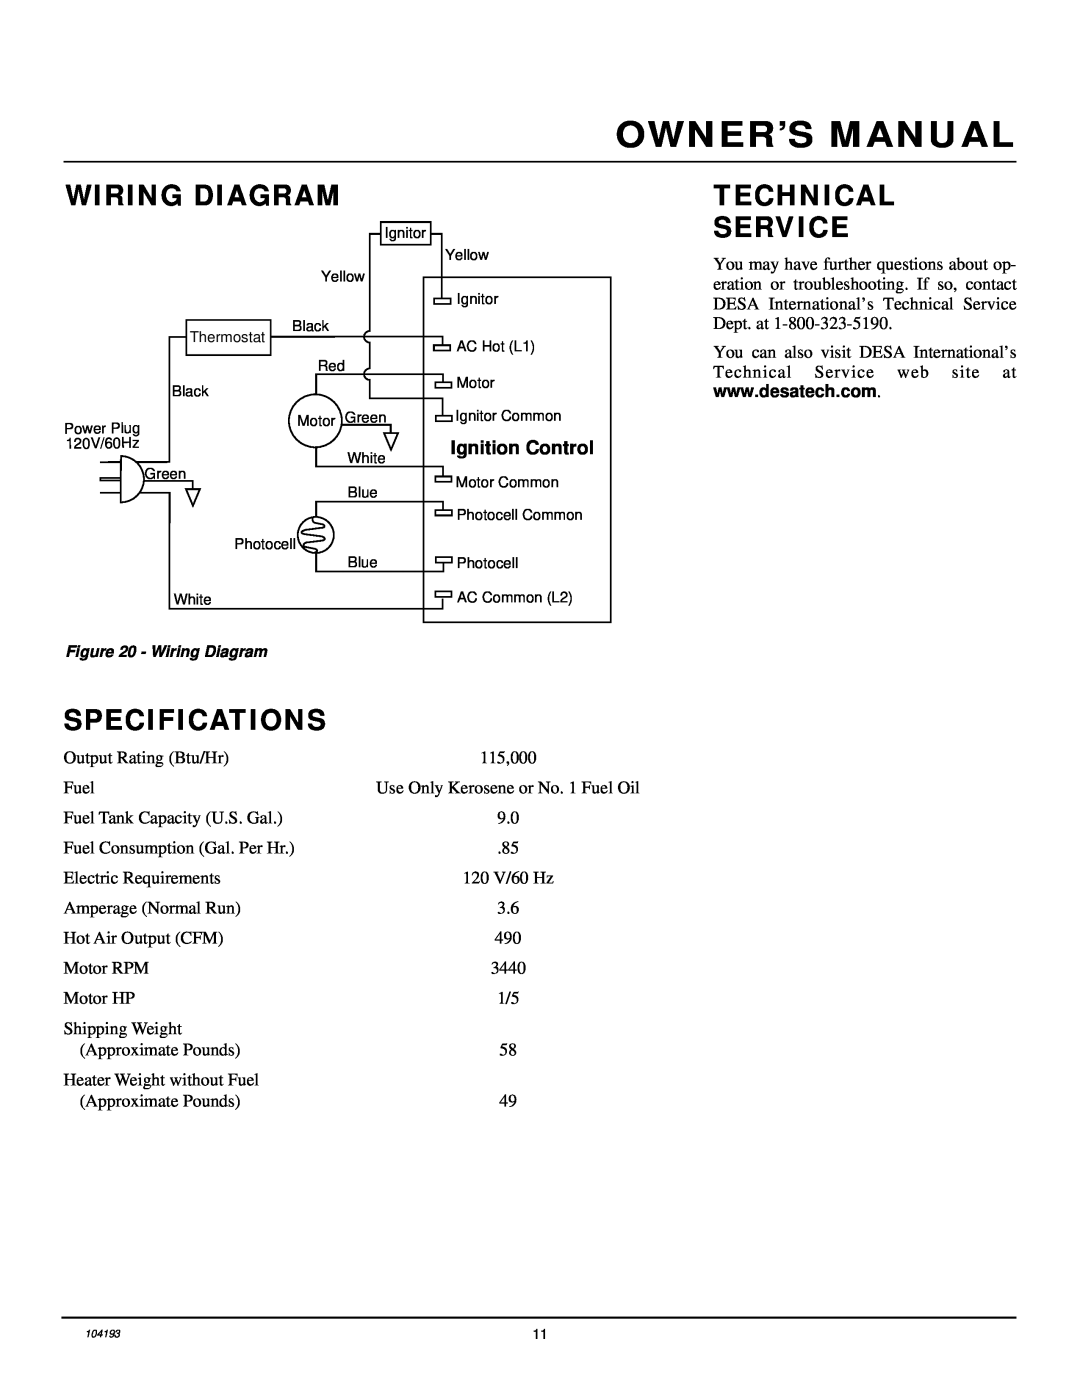 Desa B115T, REM115T, R115T owner manual Wiring Diagram, Technical Service, Specifications, Ignition Control 